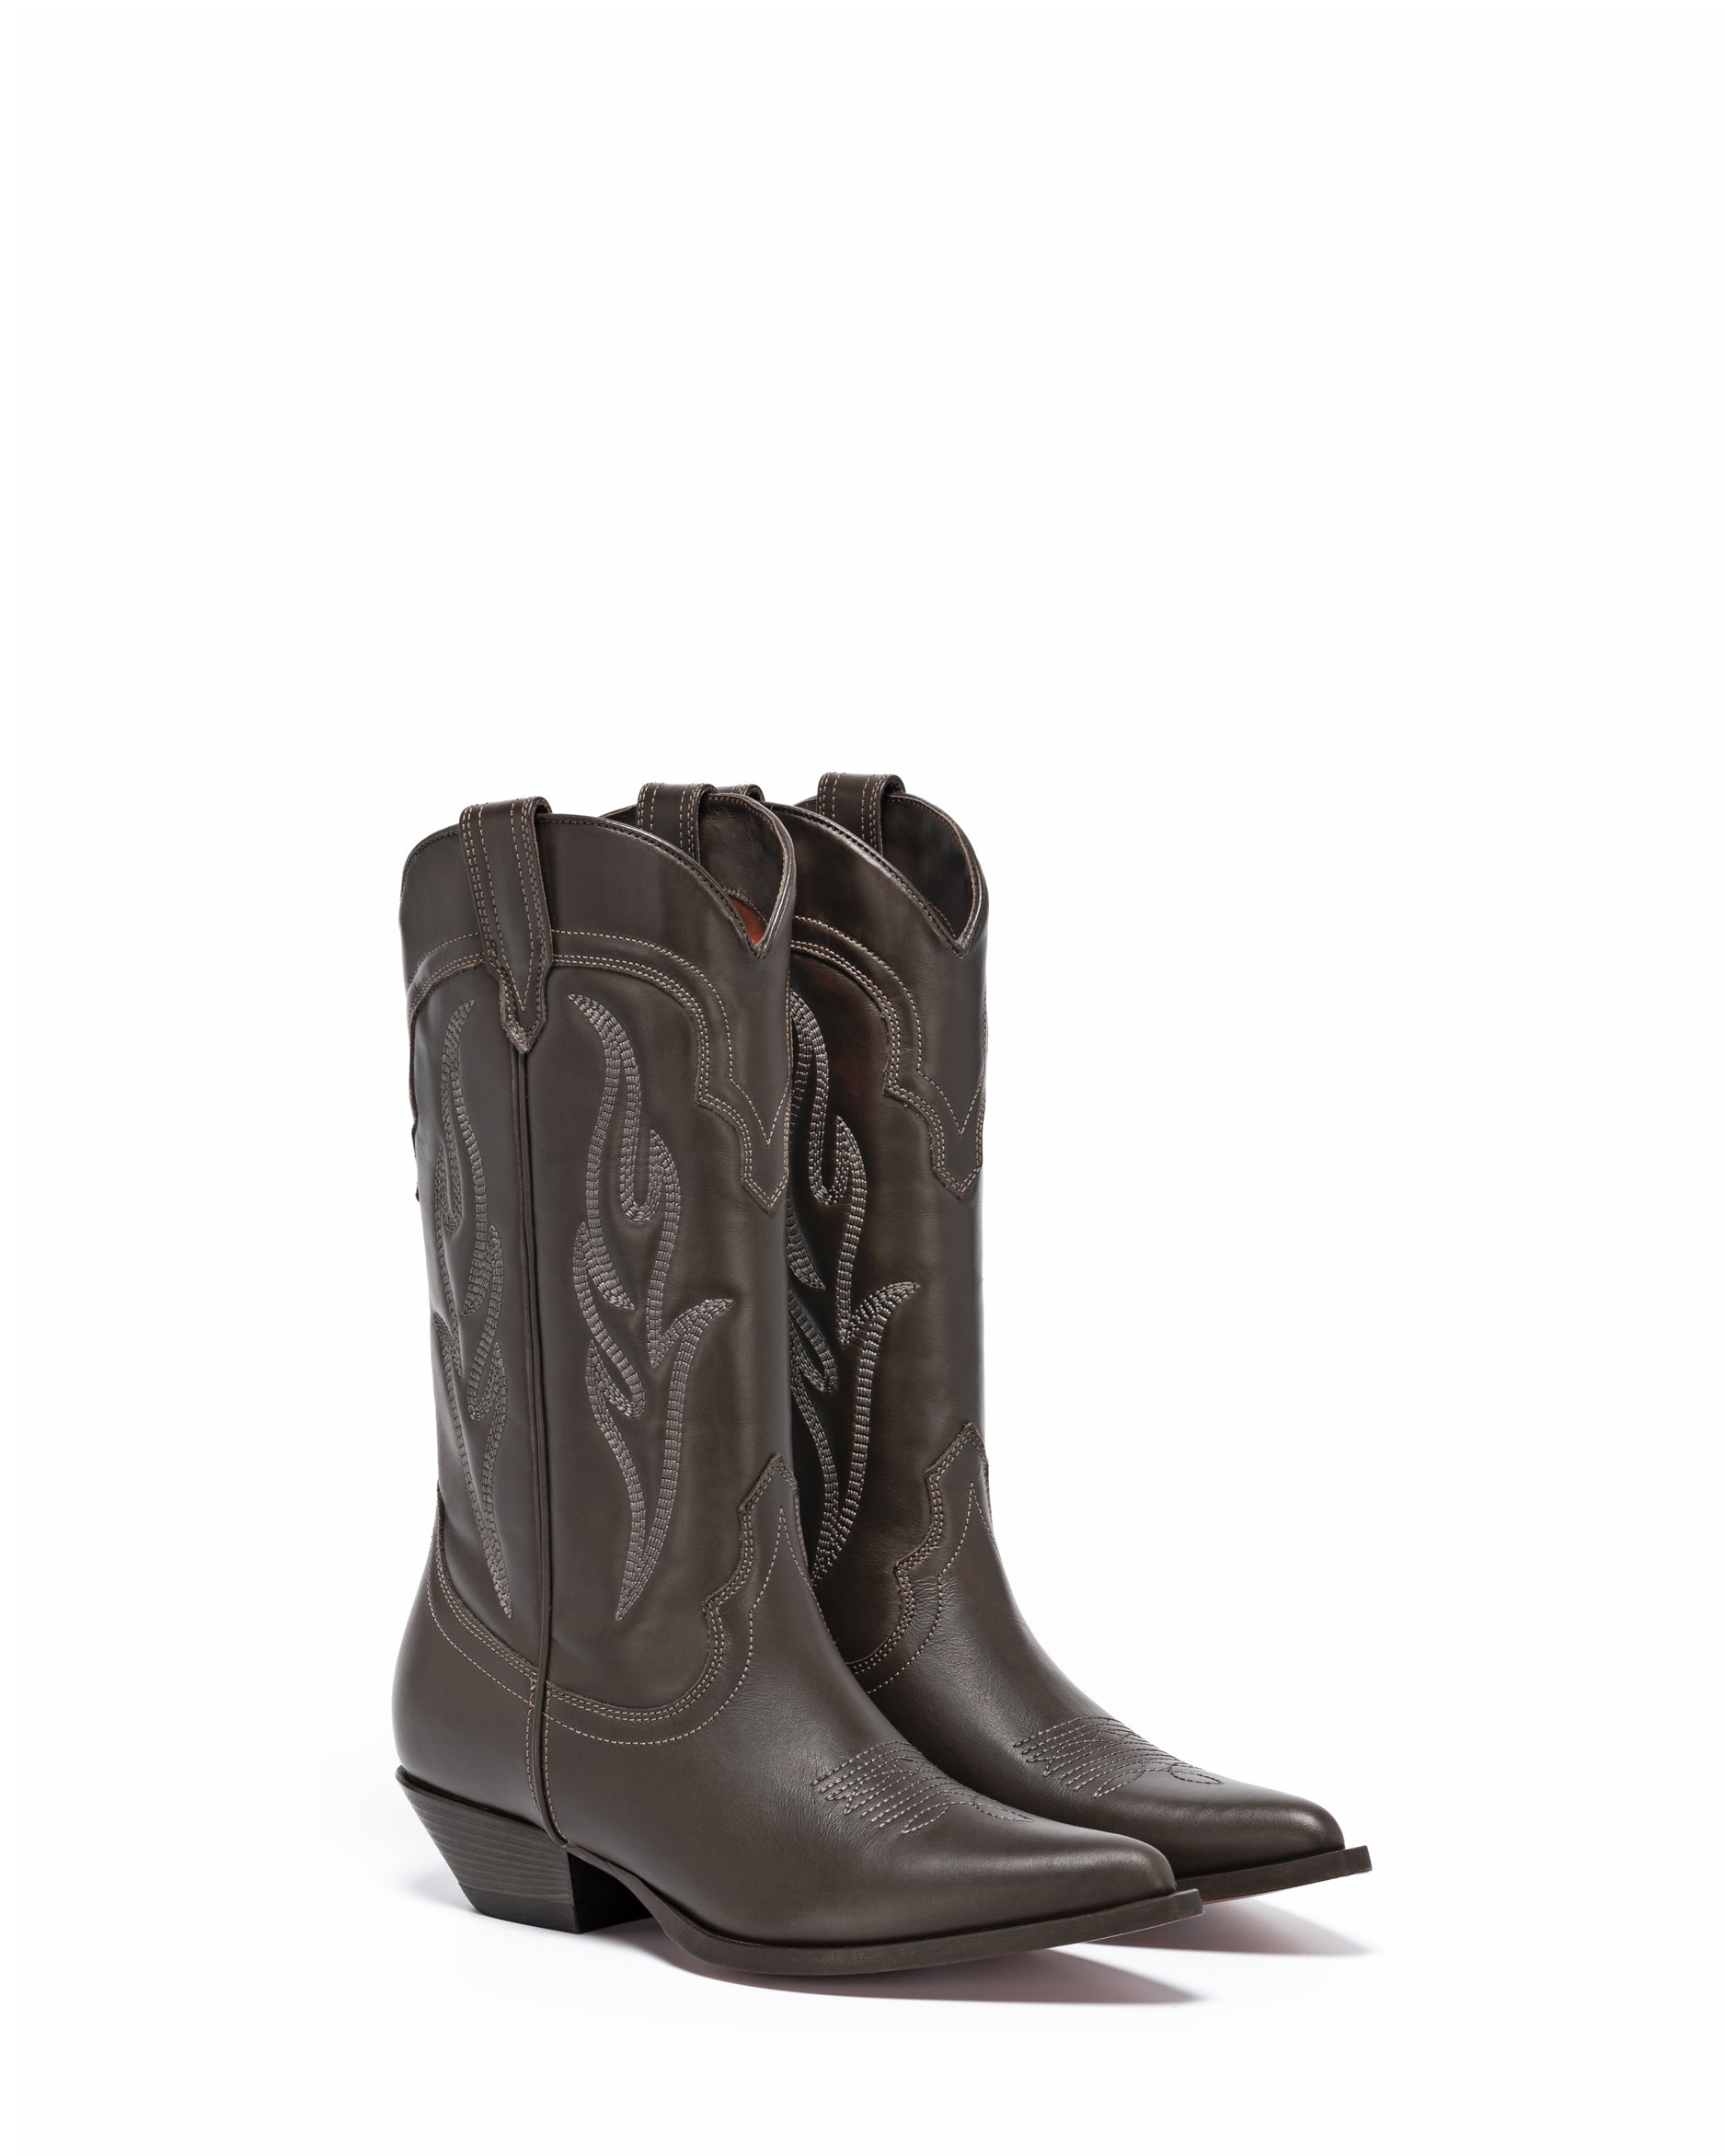 Santafe Women's Cowboy Boots in Brown Calfskin | On tone embroidery 02